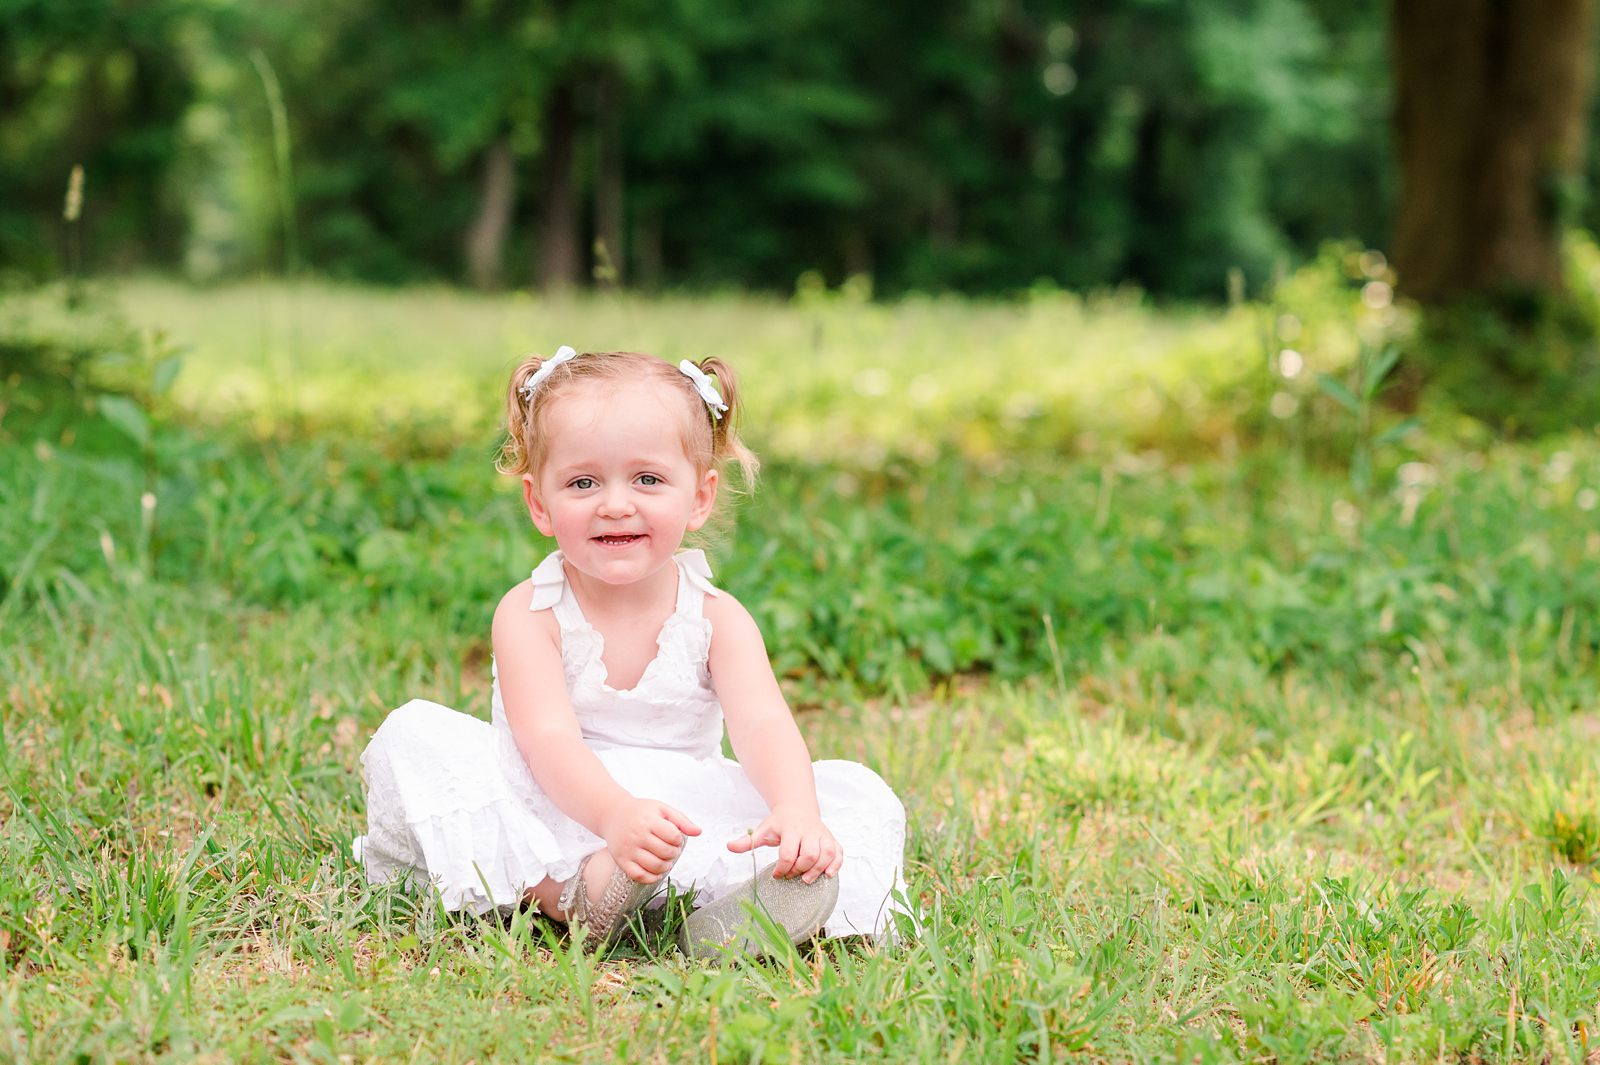 2020 Richmond Spring Mini Sessions at Rural Plains Park with Mechanicceslville Family Photographer Kailey Brianne Photography. 